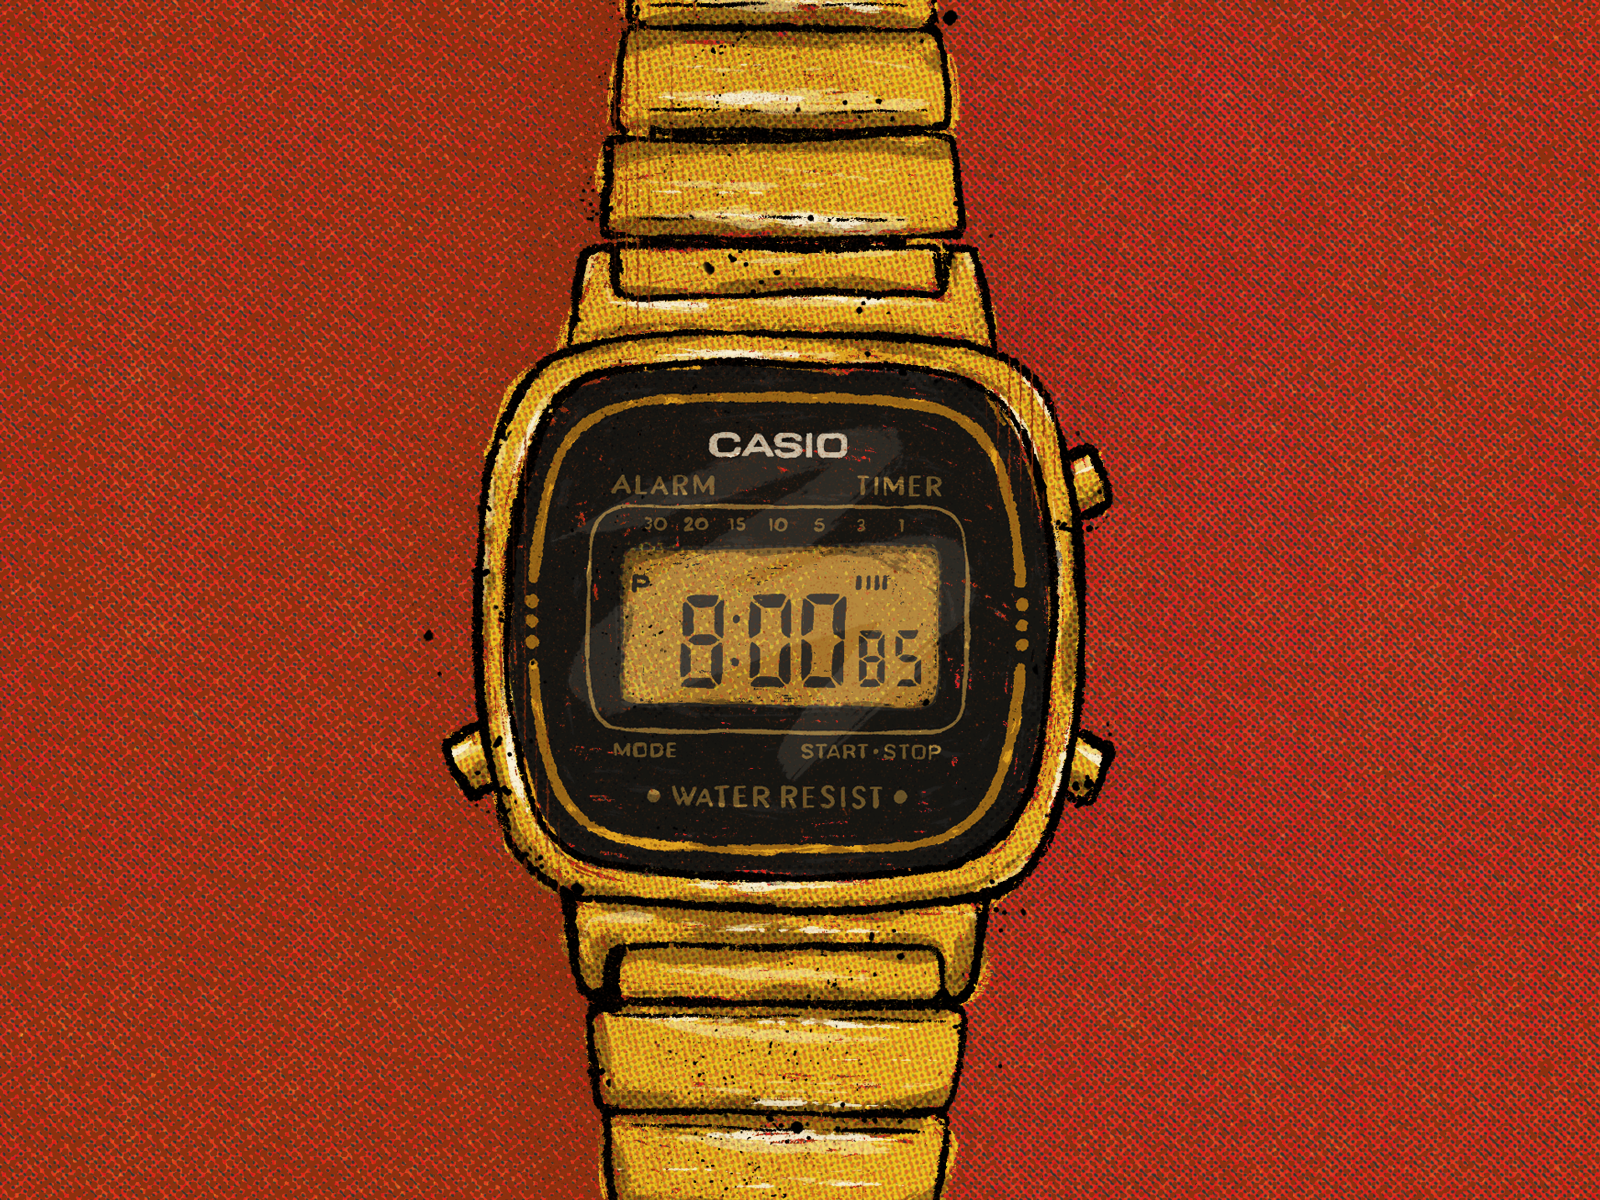 Casio Watch by Katie Cooper on Dribbble